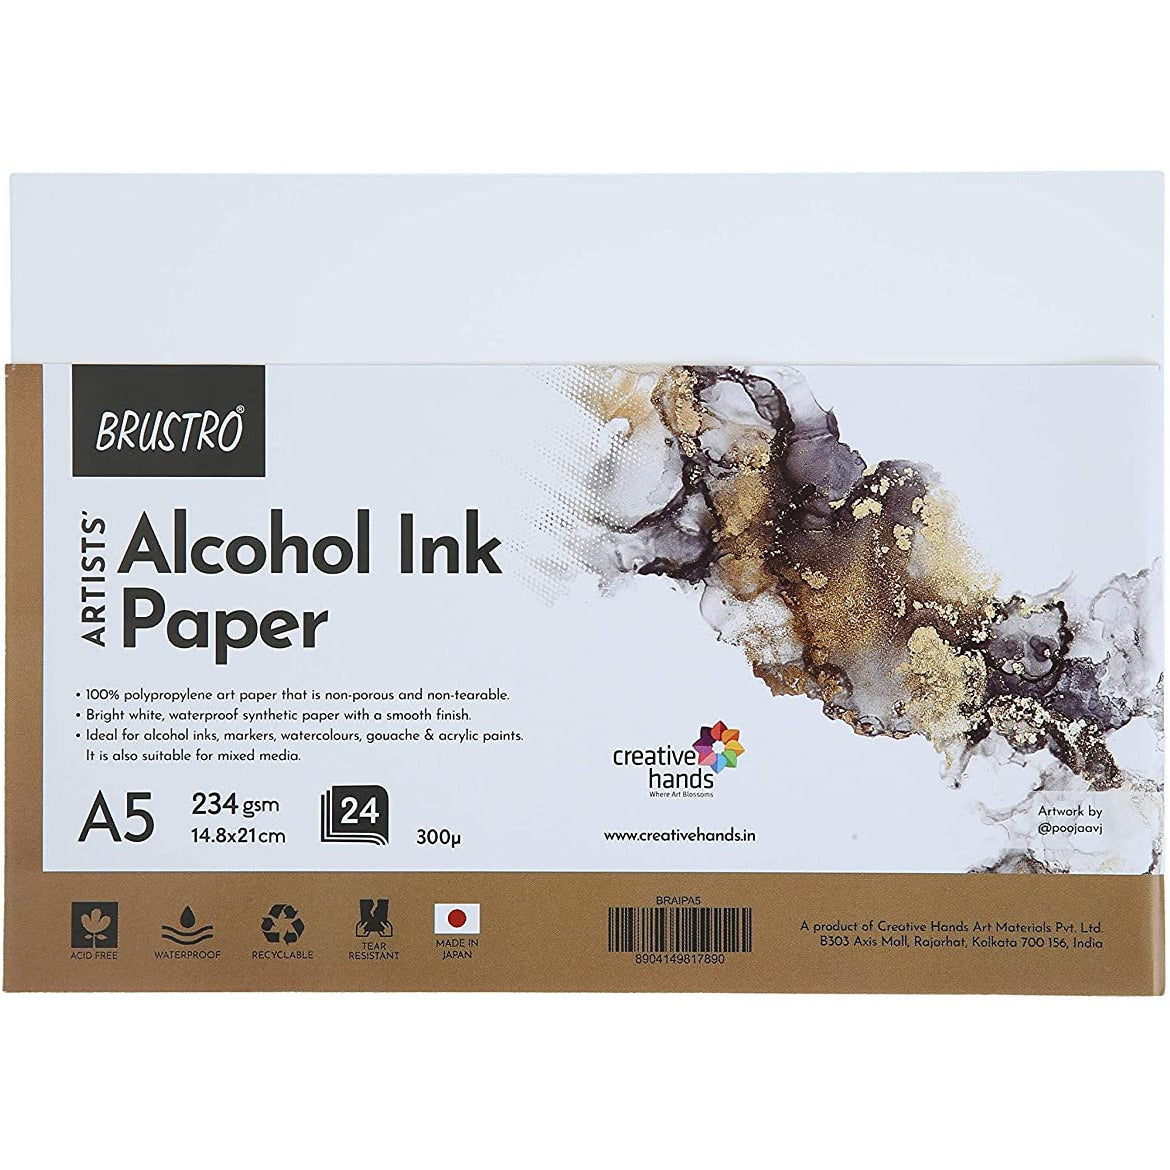 BRUSTRO ALCOHOL INK PAPER 234GSM A5